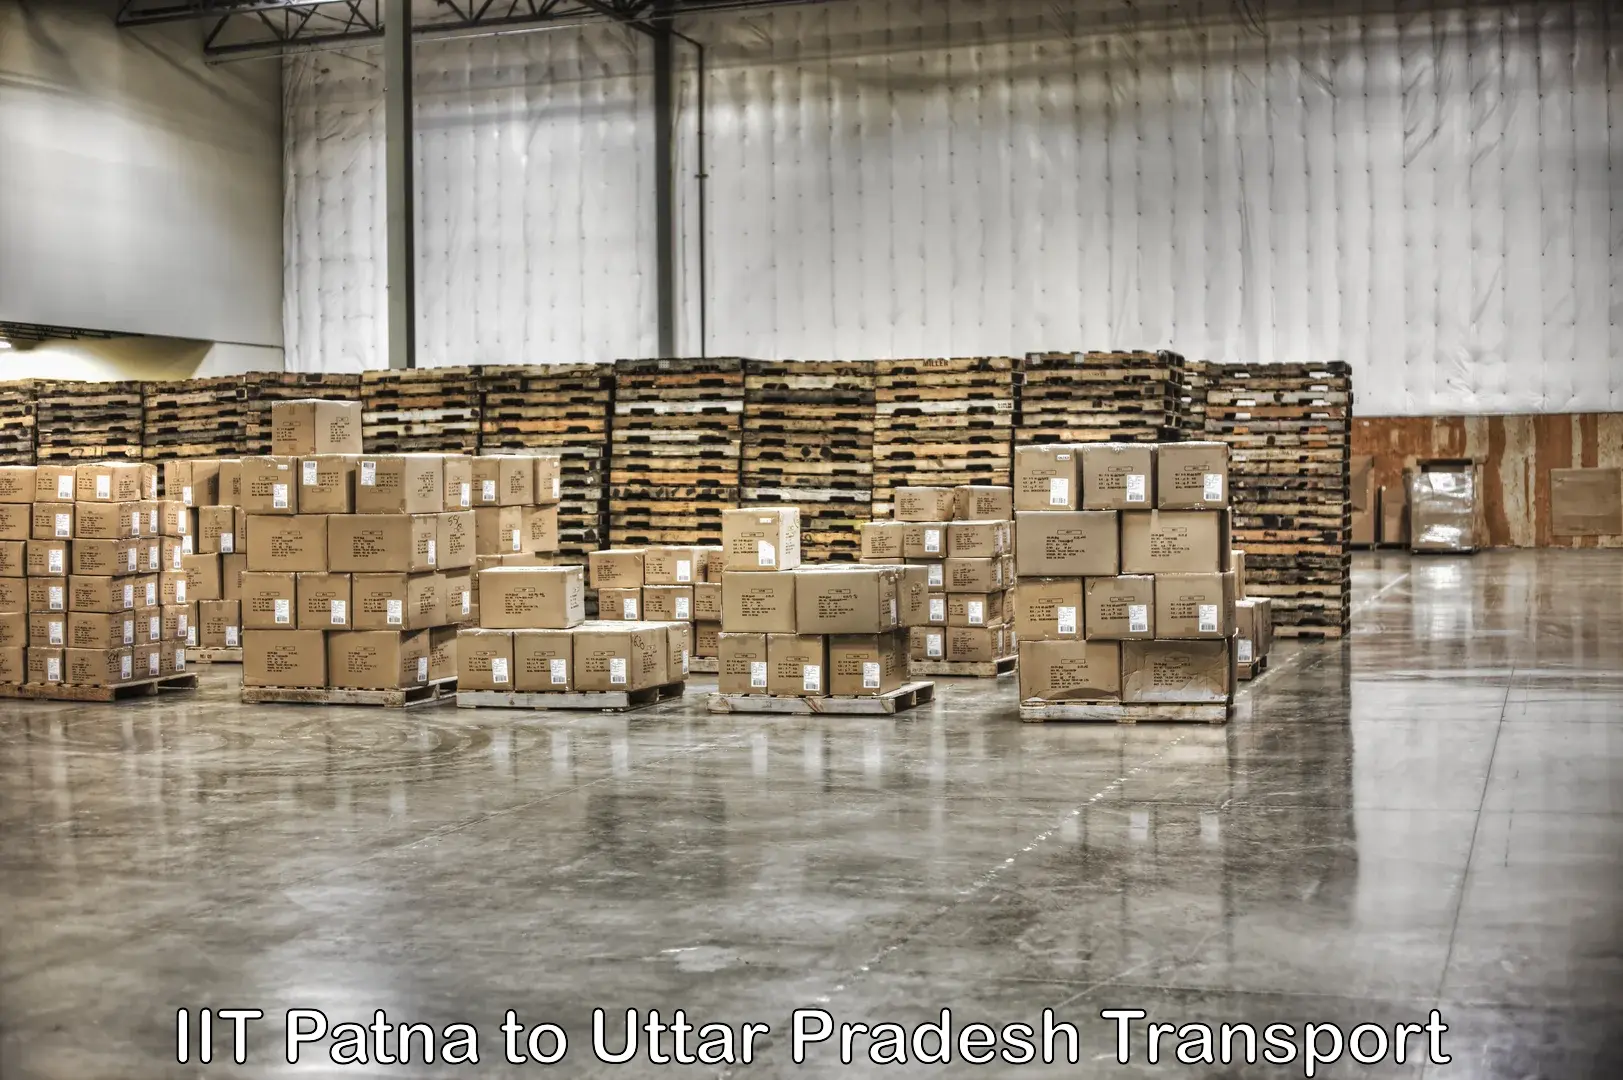 Cargo train transport services IIT Patna to Unnao